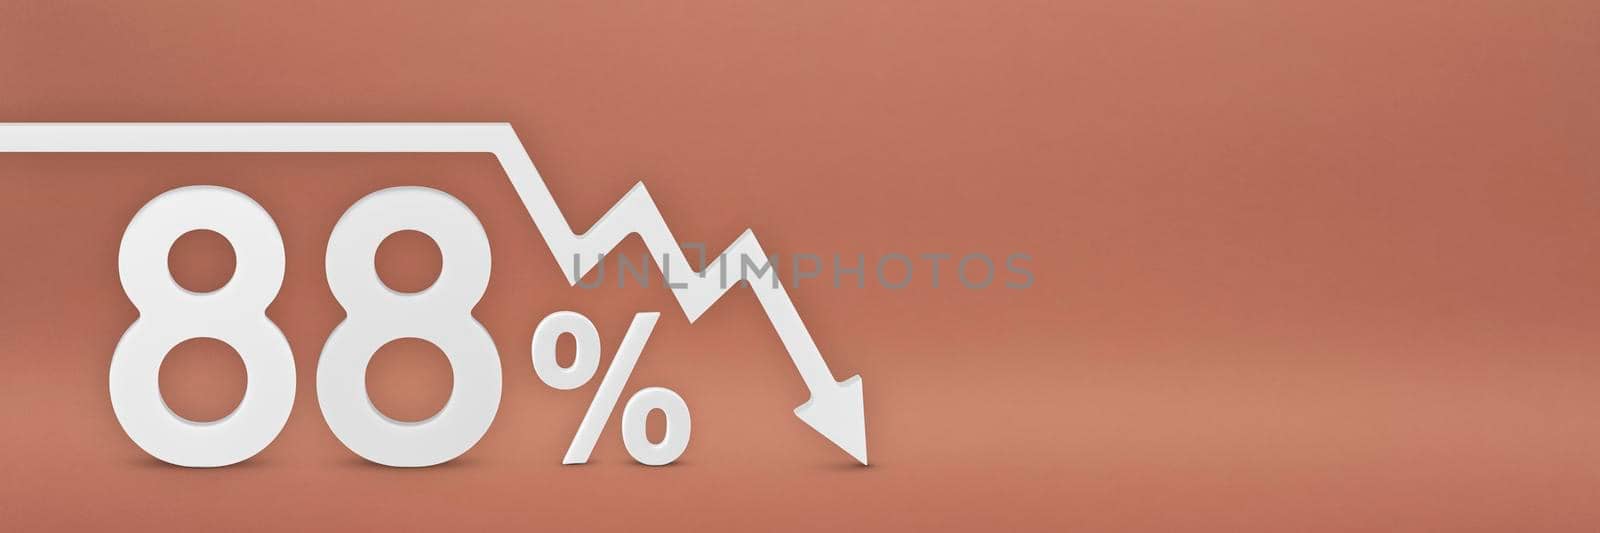 eighty-eight percent, the arrow on the graph is pointing down. Stock market crash, bear market, inflation.Economic collapse, collapse of stocks.3d banner,88 percent discount sign on a red background